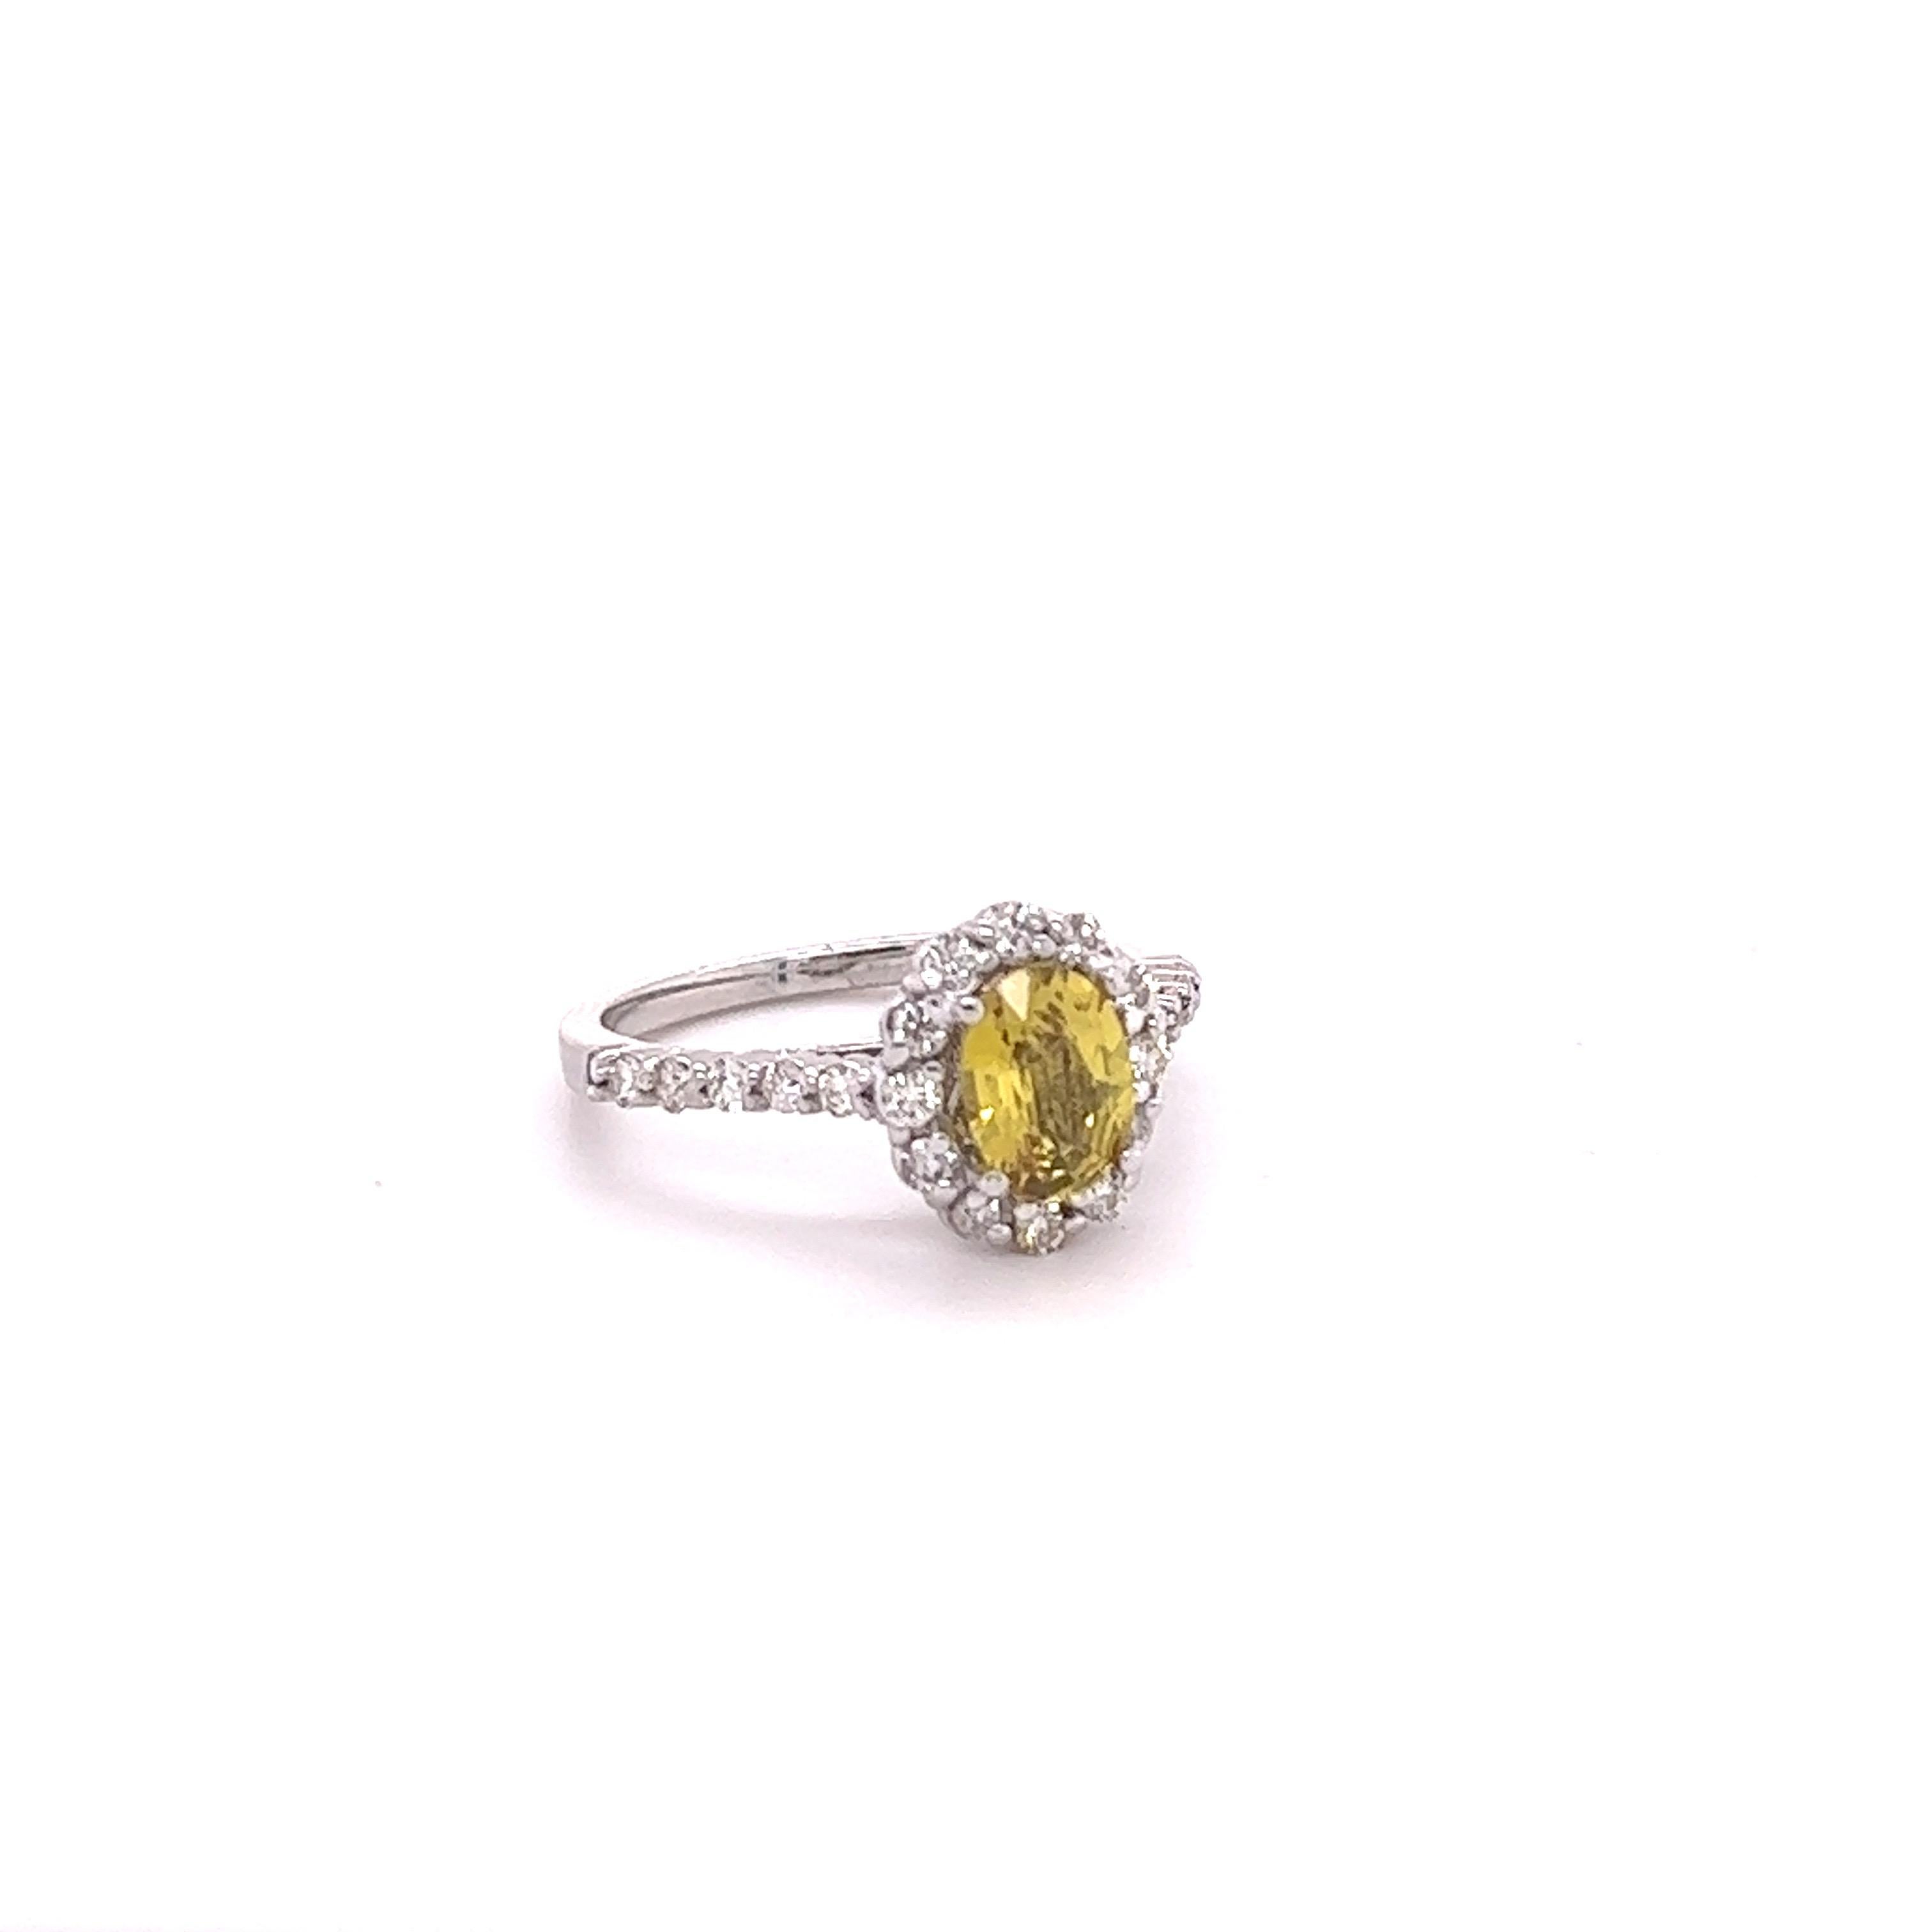 This beautiful ring has a Natural Oval Cut Yellow Sapphire with No Heat that weights 1.62 Carats. 

The ring is embellished with 24 Round Cut Diamonds that weigh 0.52 Carats with a clarity and color of VS/H. 
The total carat weight of the ring is